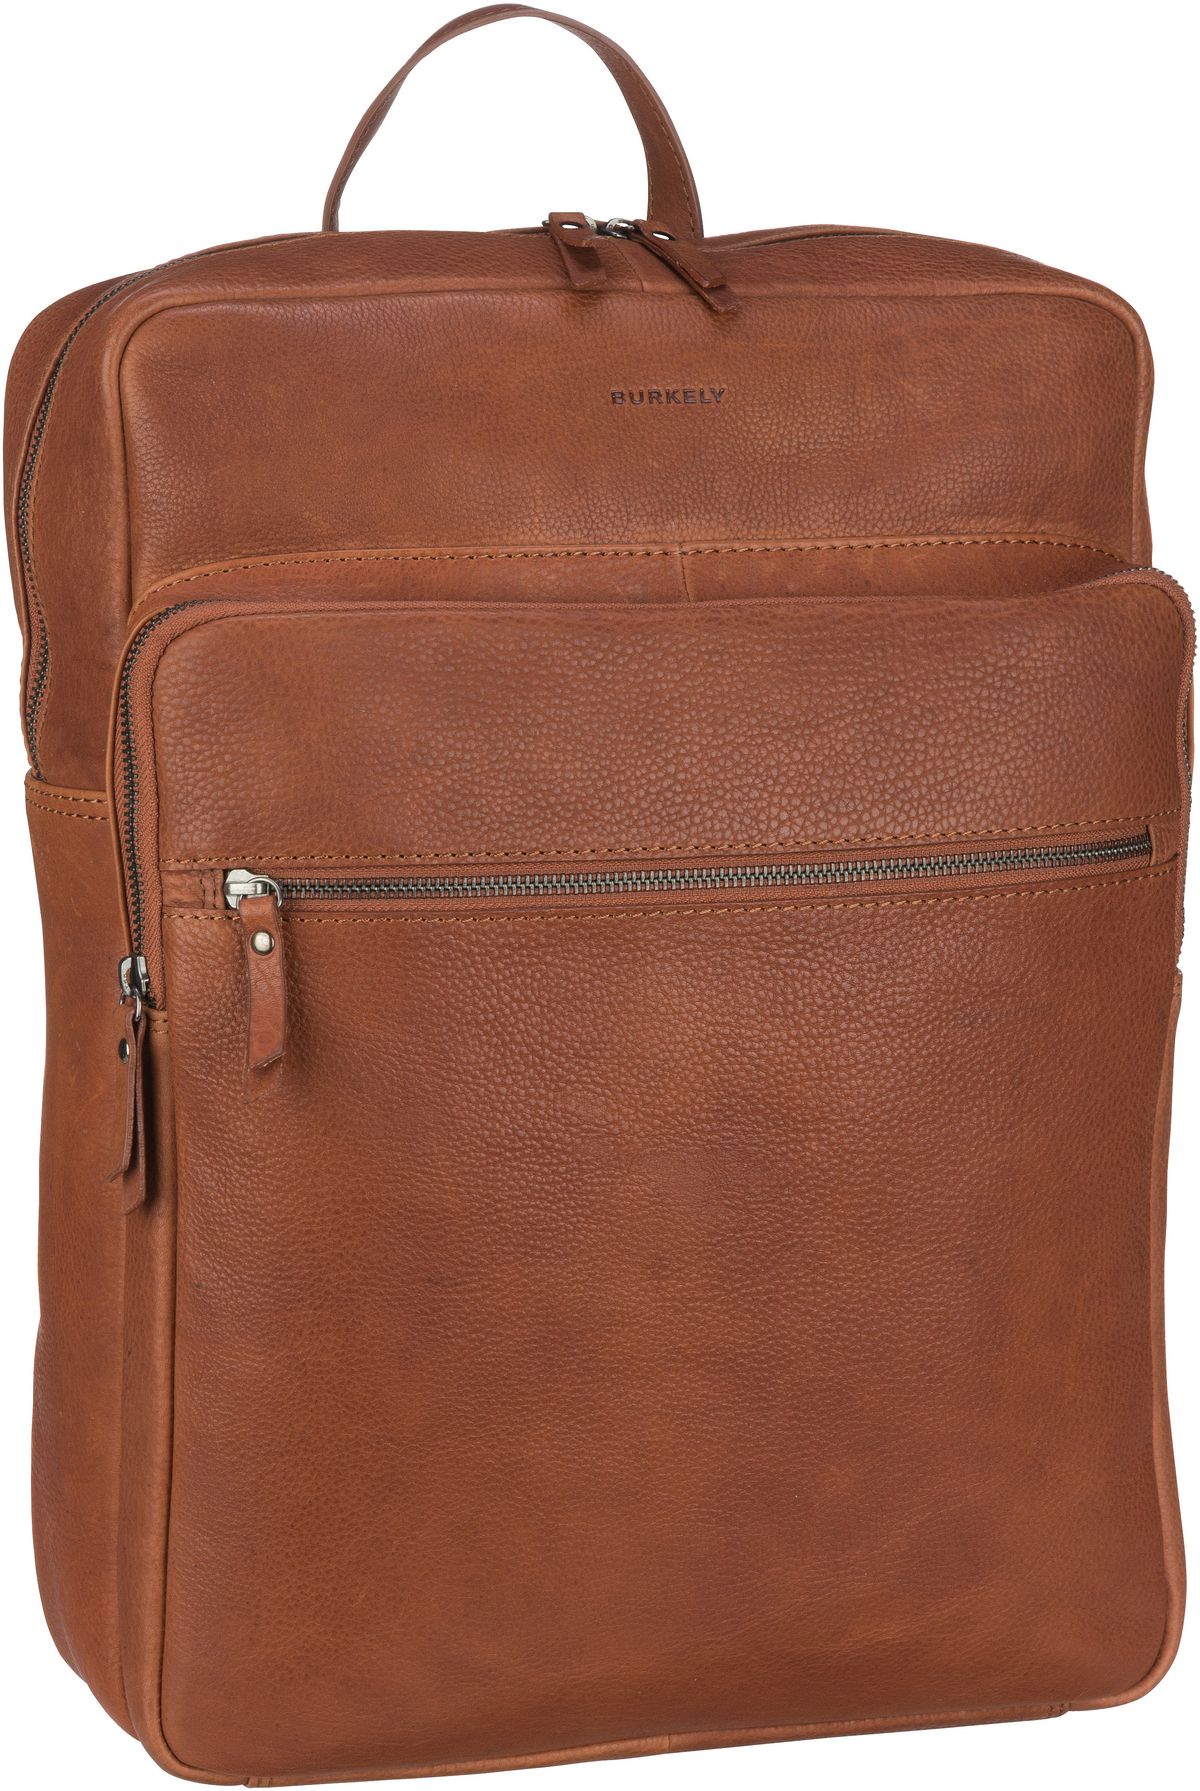 Burkely Antique Avery Backpack 5364 - Cognac